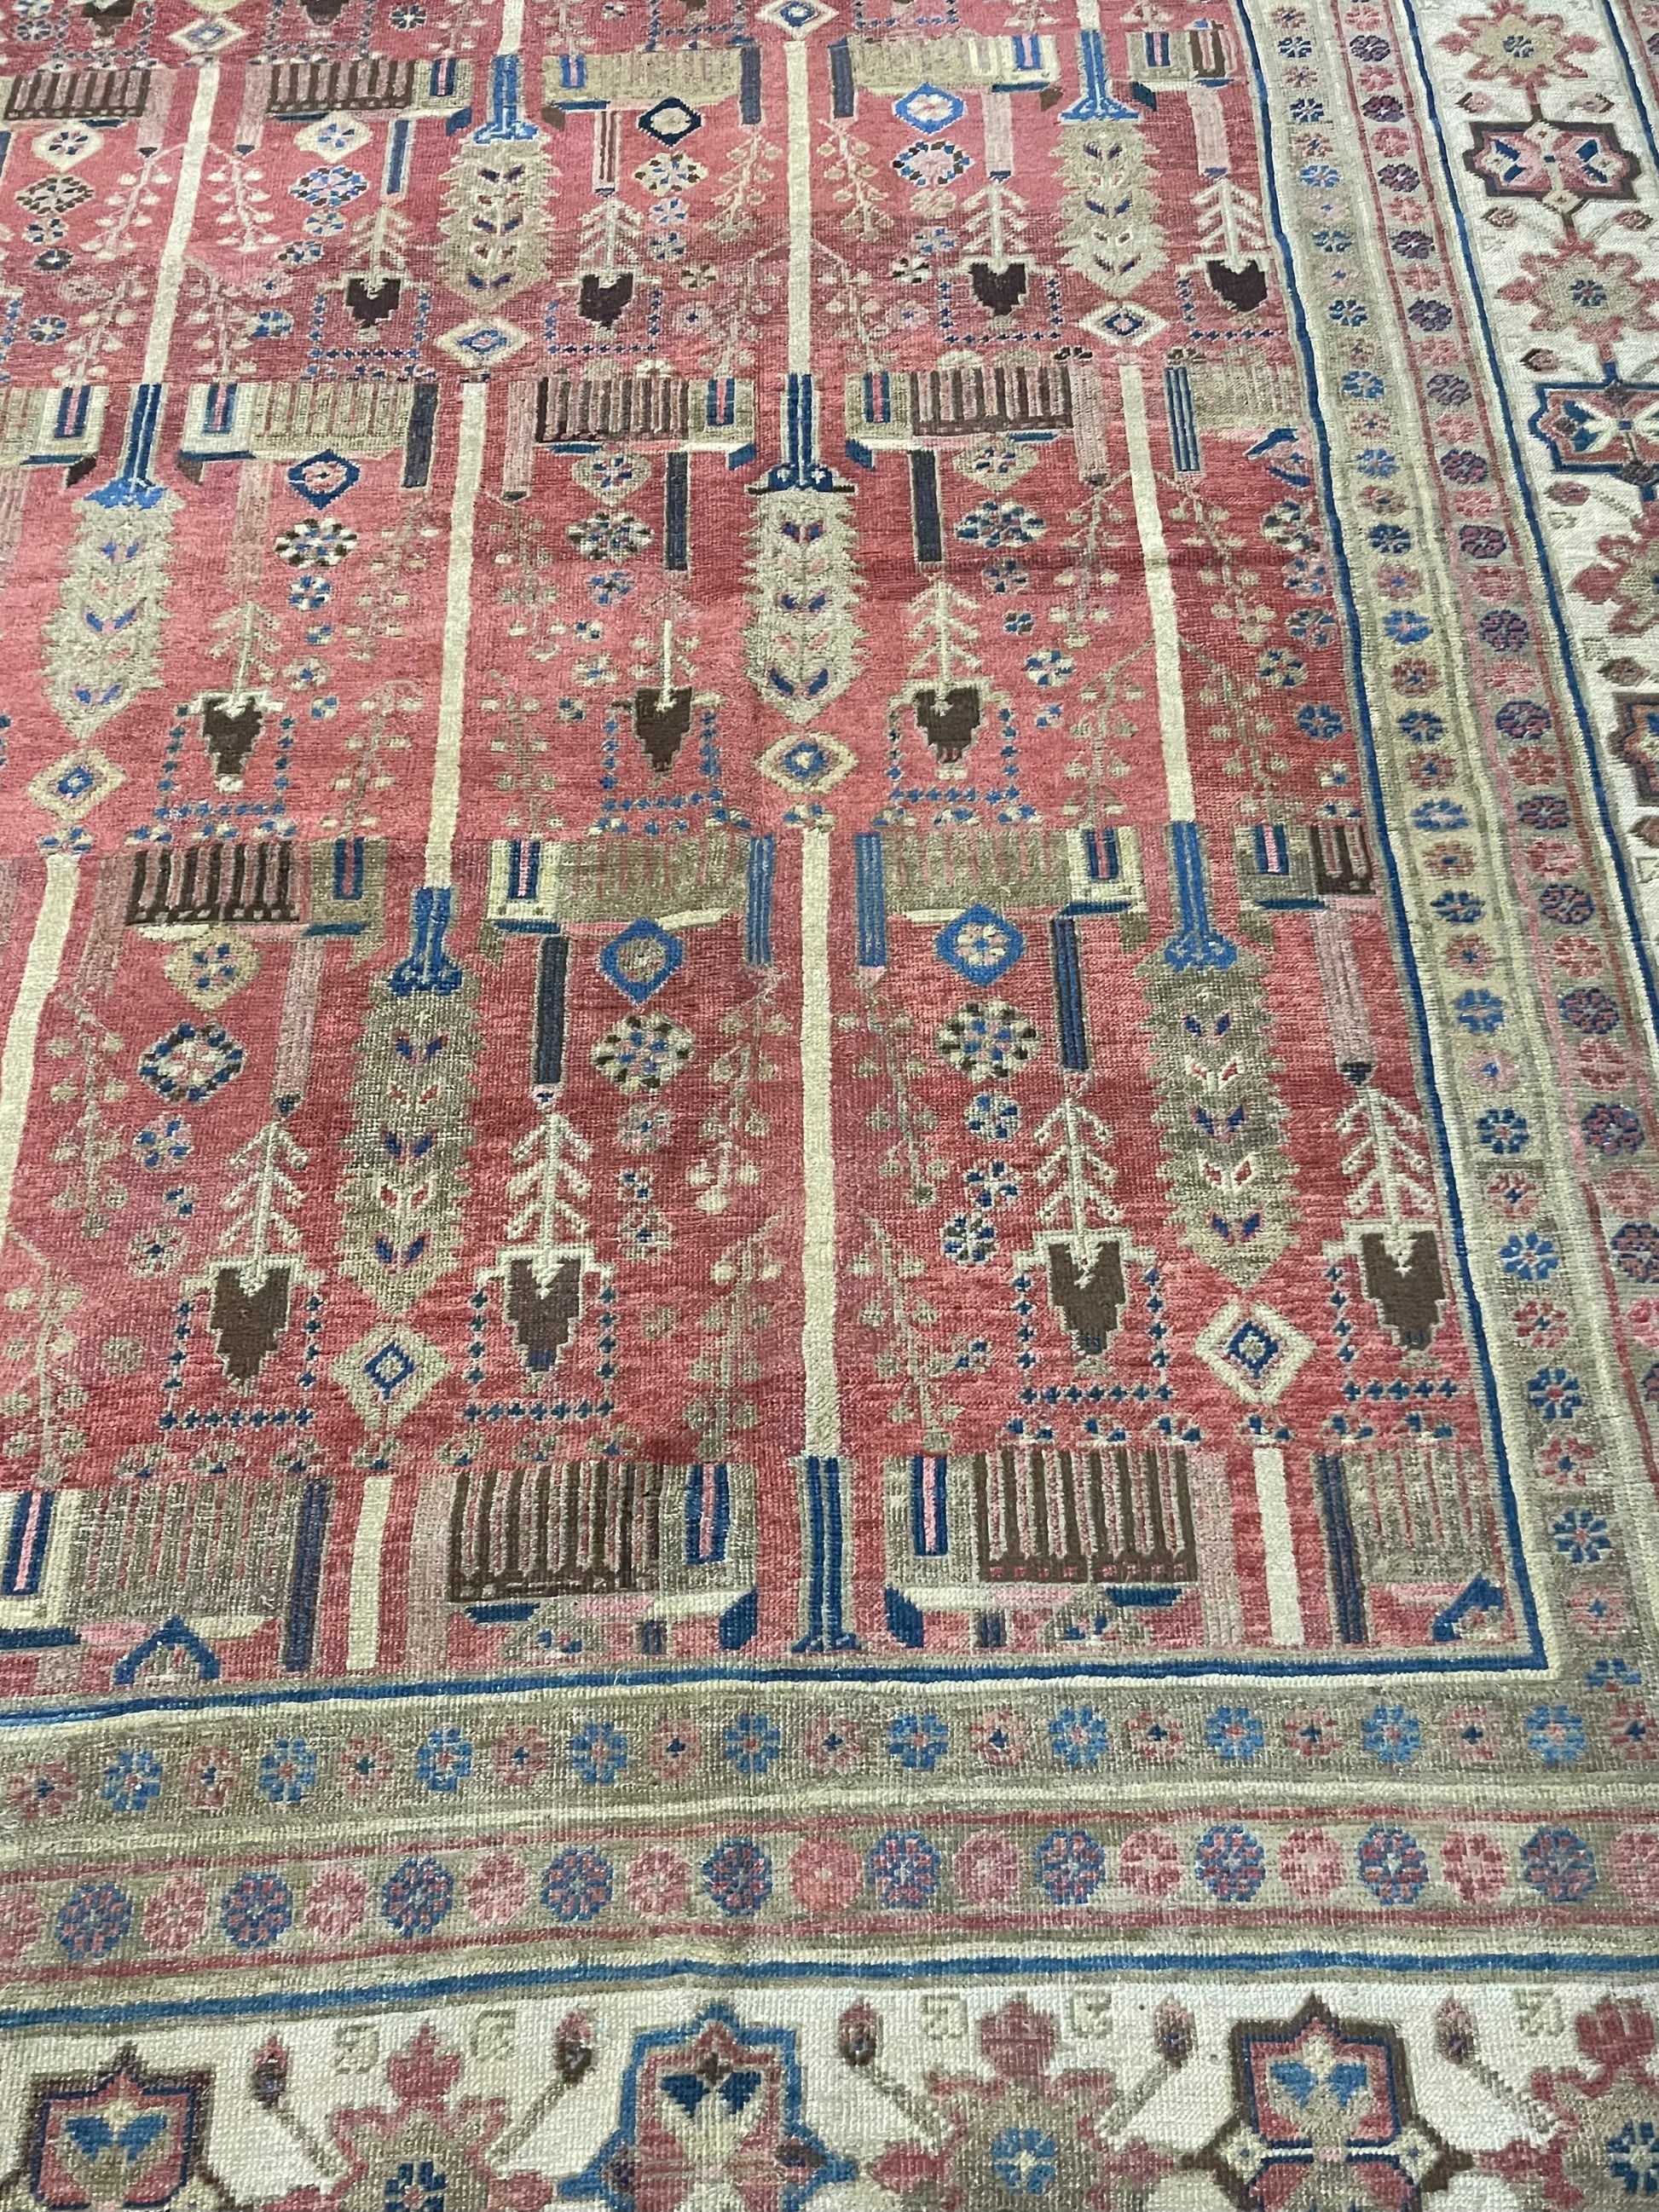 Side view of the palace-sized rug demonstrating its luxurious wool material